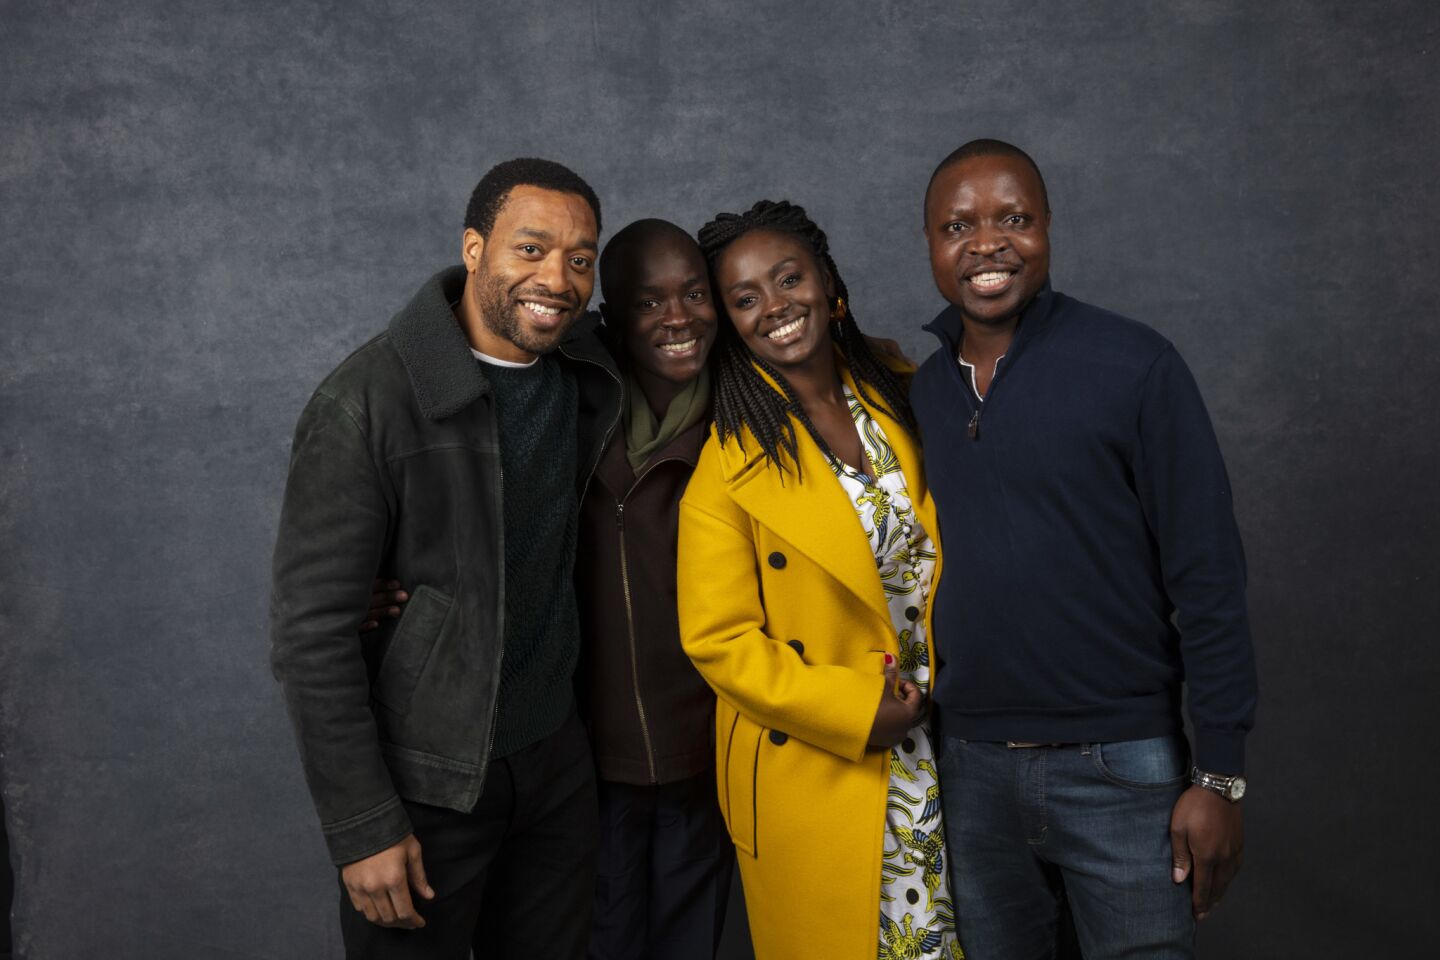 Director Chiwetel Ejiofor, actor Maxwell Simba, actress Aissa Maiga and William Kamkwamba from the film "The Boy Who Harnessed the Wind."